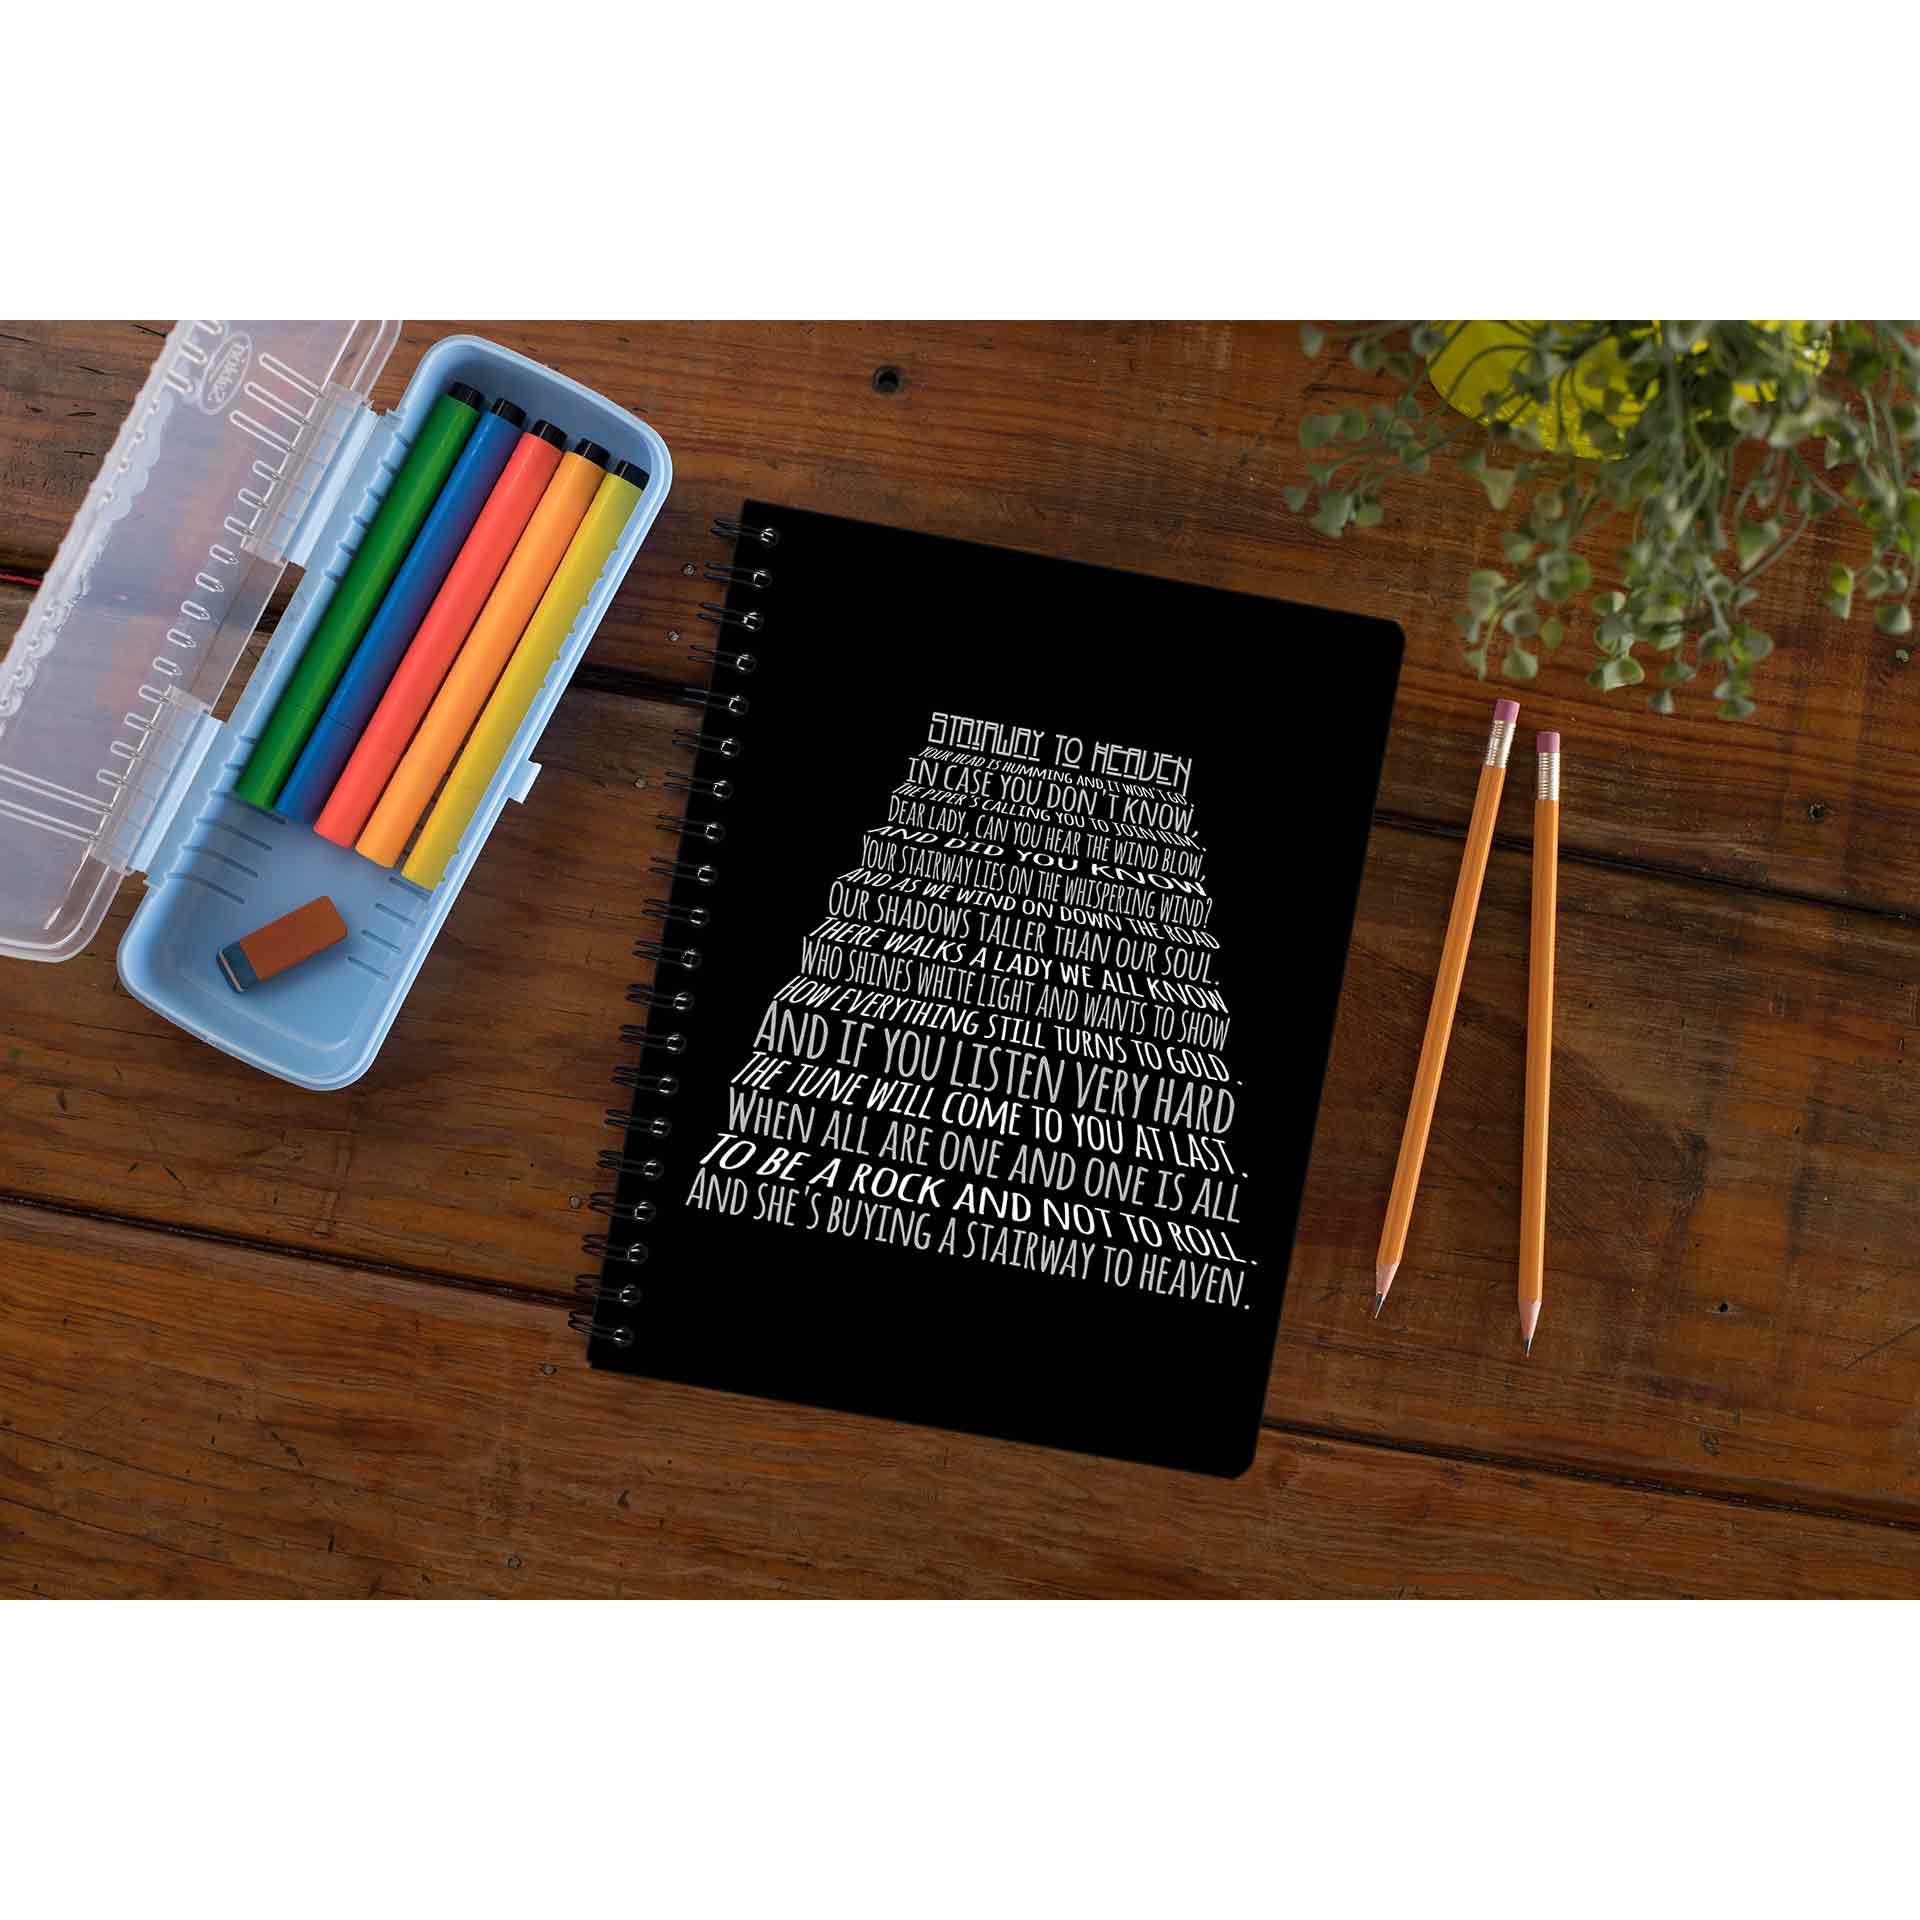 Led Zeppelin Notebook - Stairway To Heaven Notebook The Banyan Tee TBT